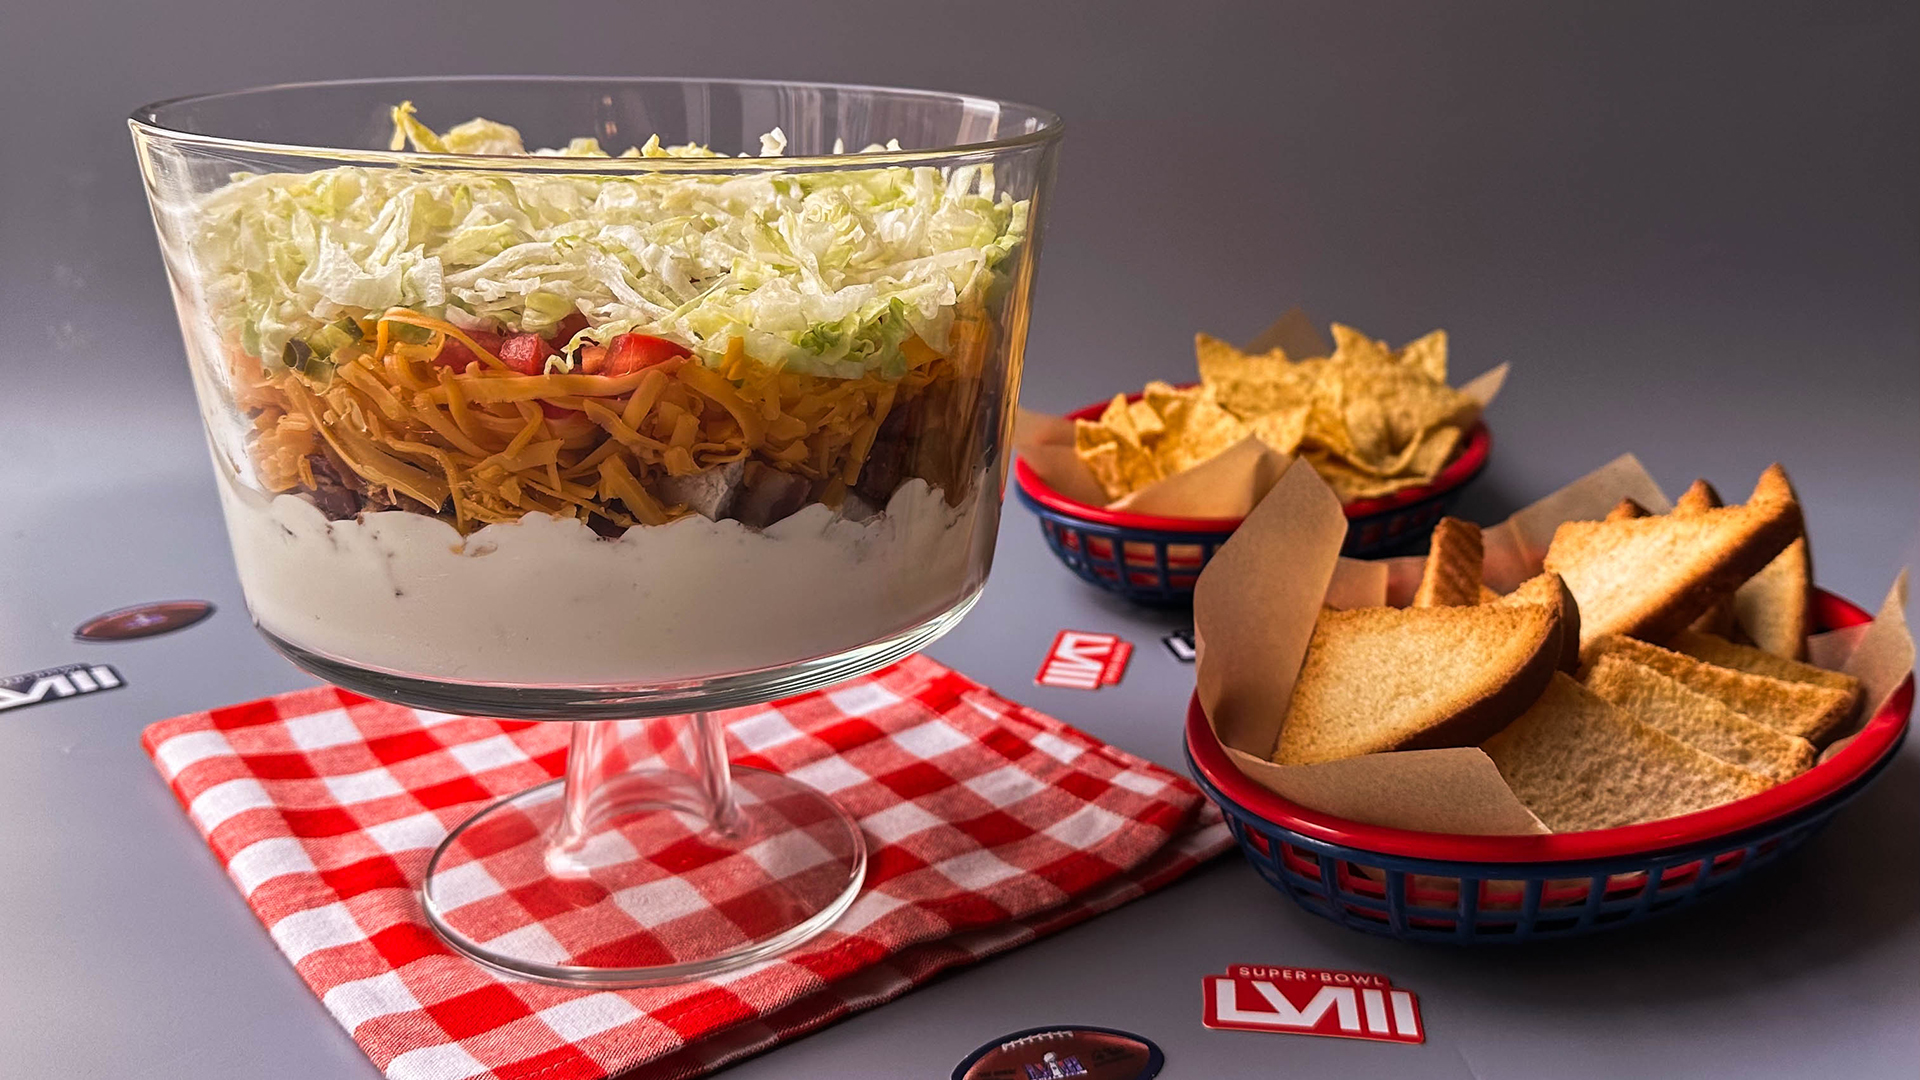 Turkey Clubhouse 7-layer Dip